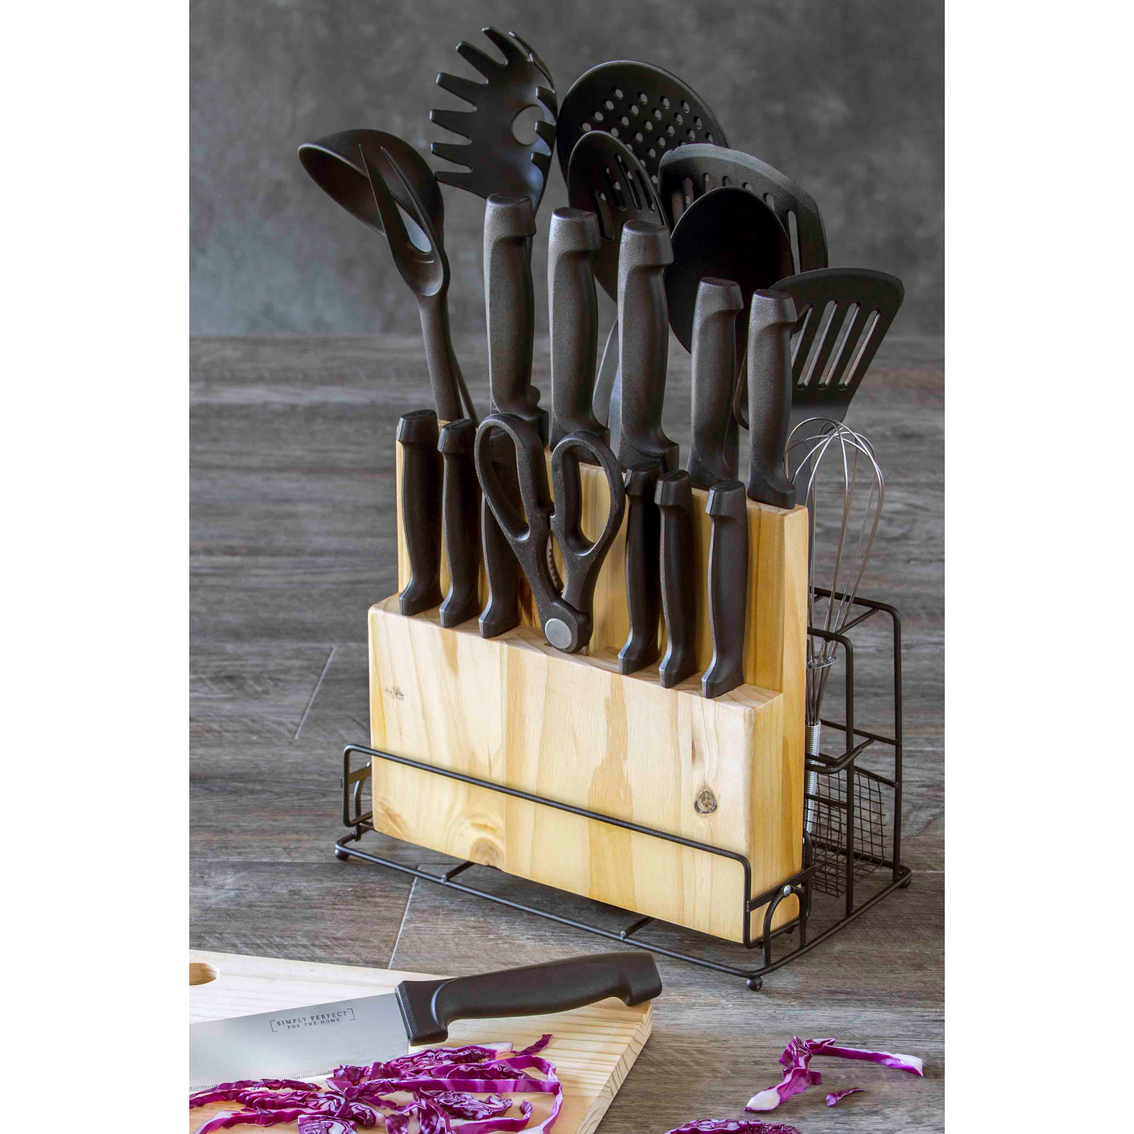 Simply Perfect 25 pc. Stainless Steel Cutlery Set - Image 2 of 2